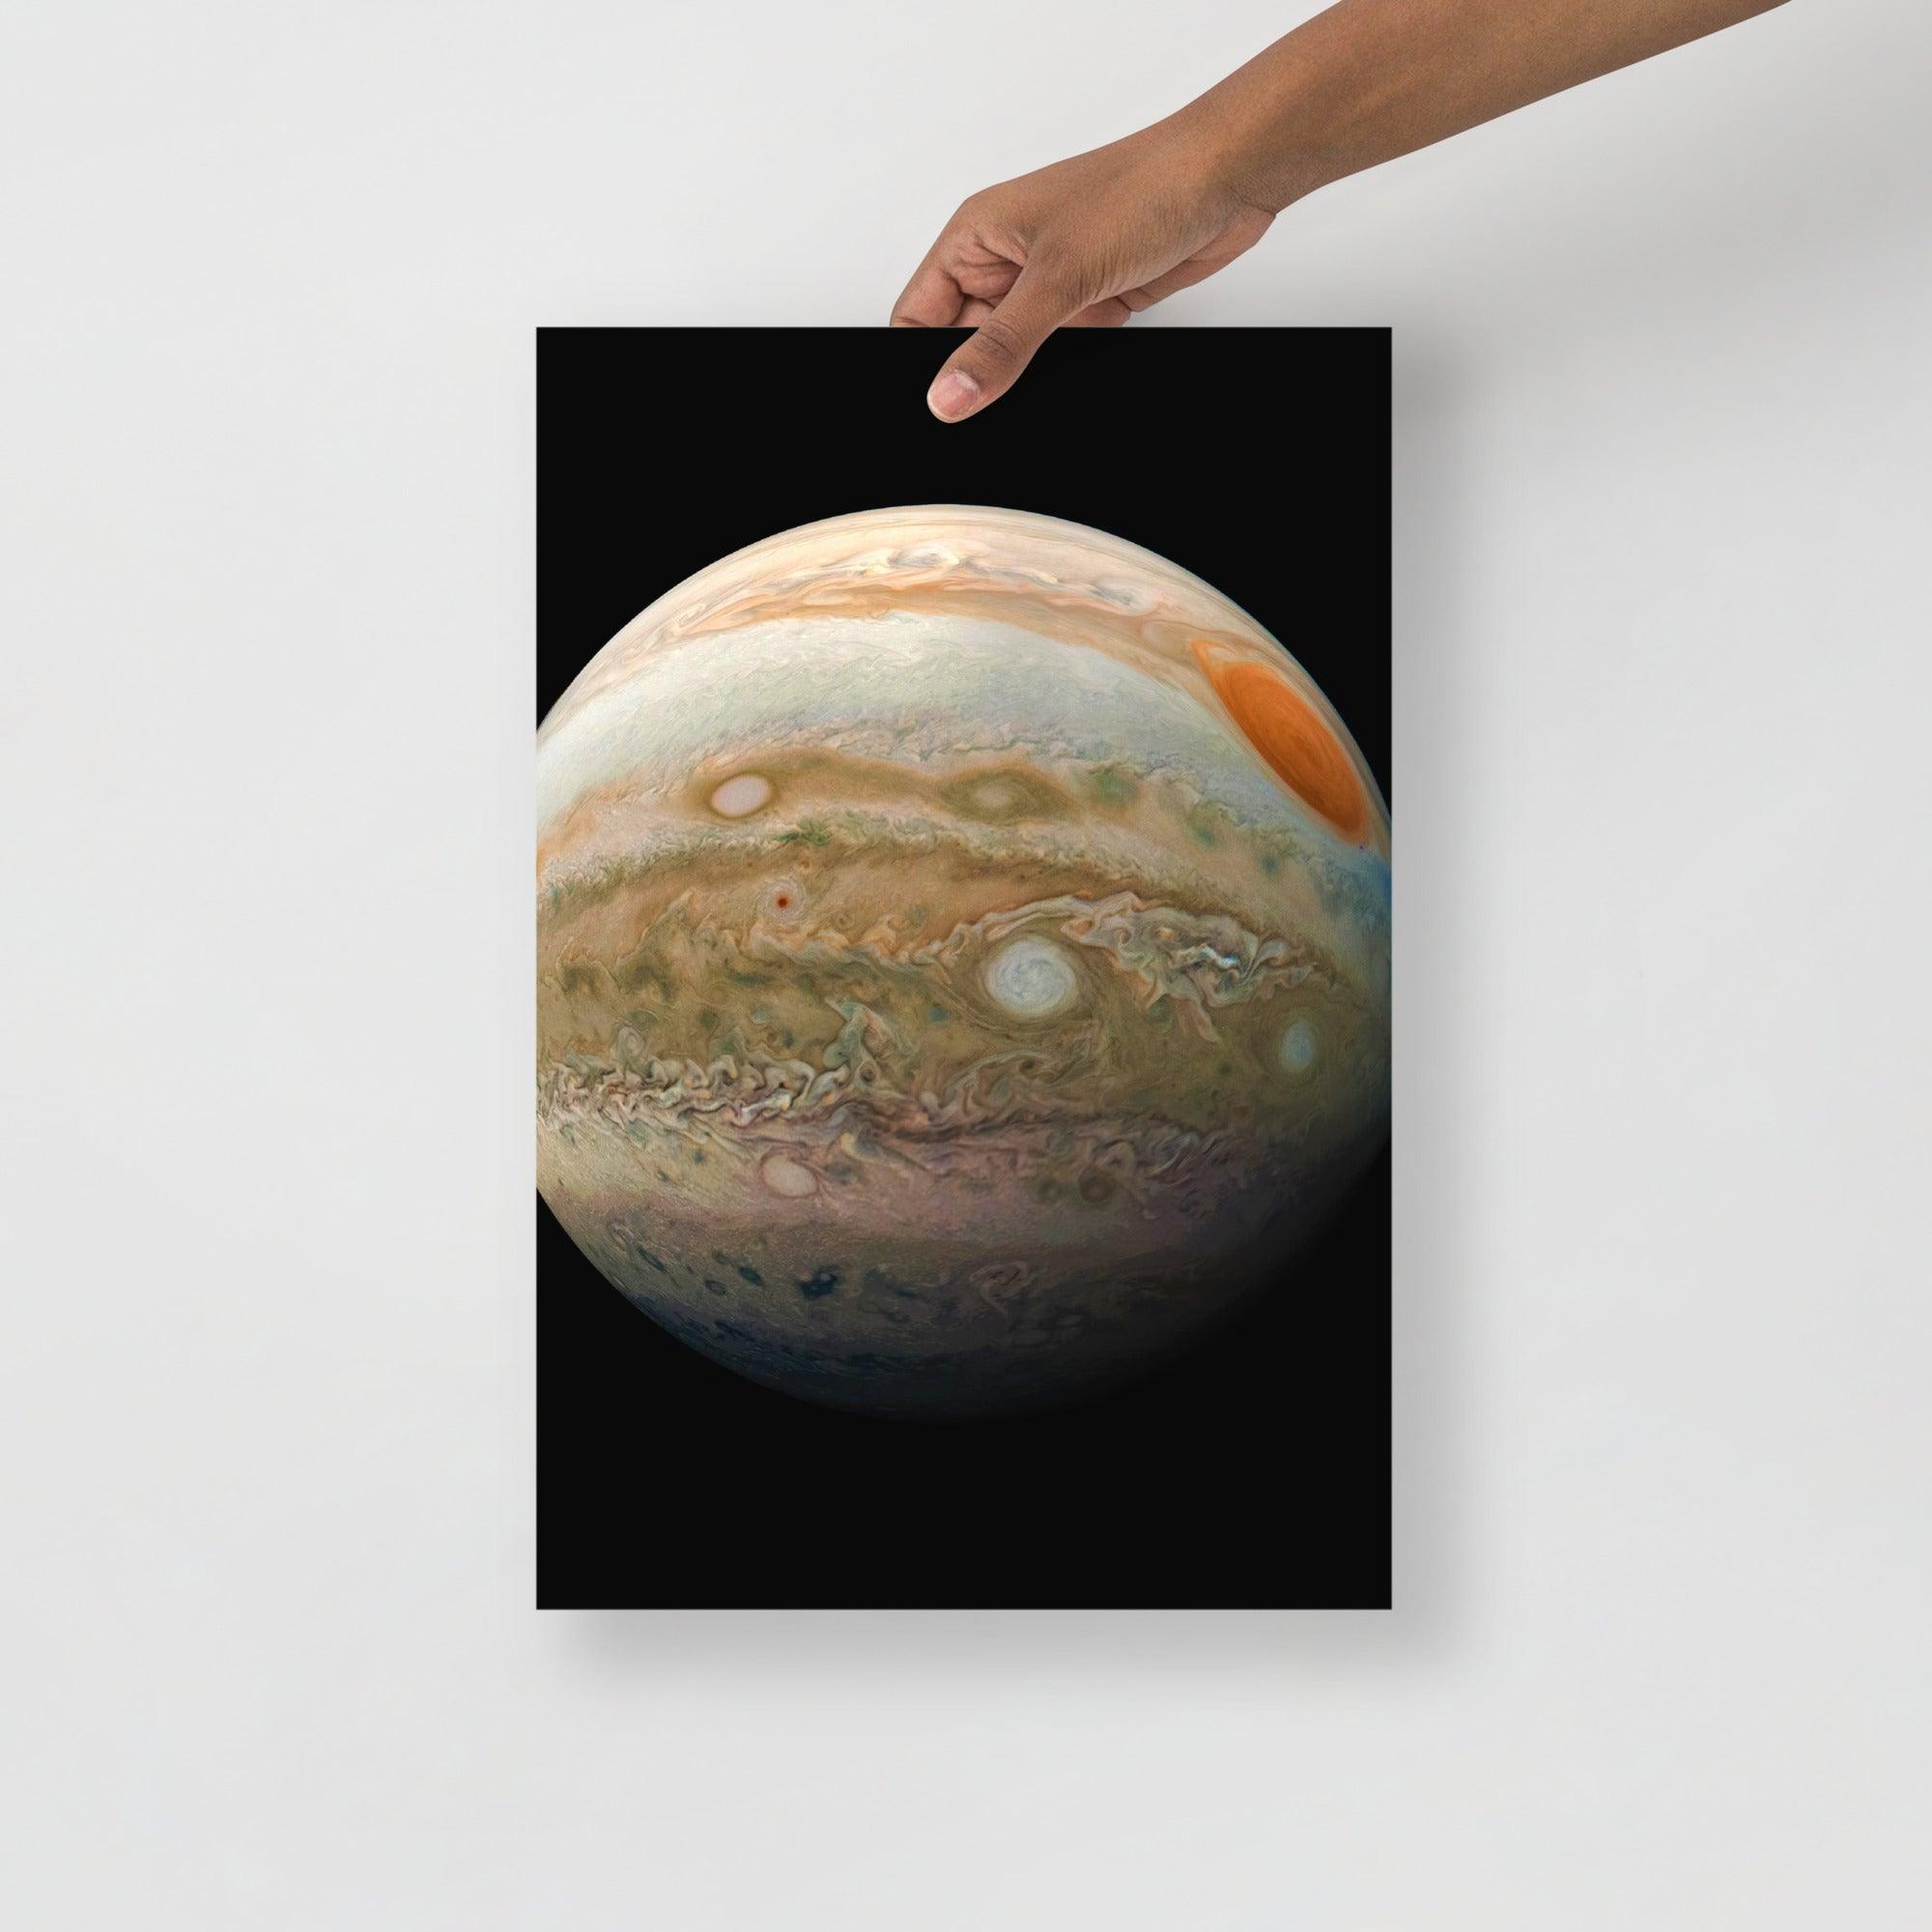 A Planet Jupiter From the Juno Spacecraft poster on a plain backdrop in size 12x18”.